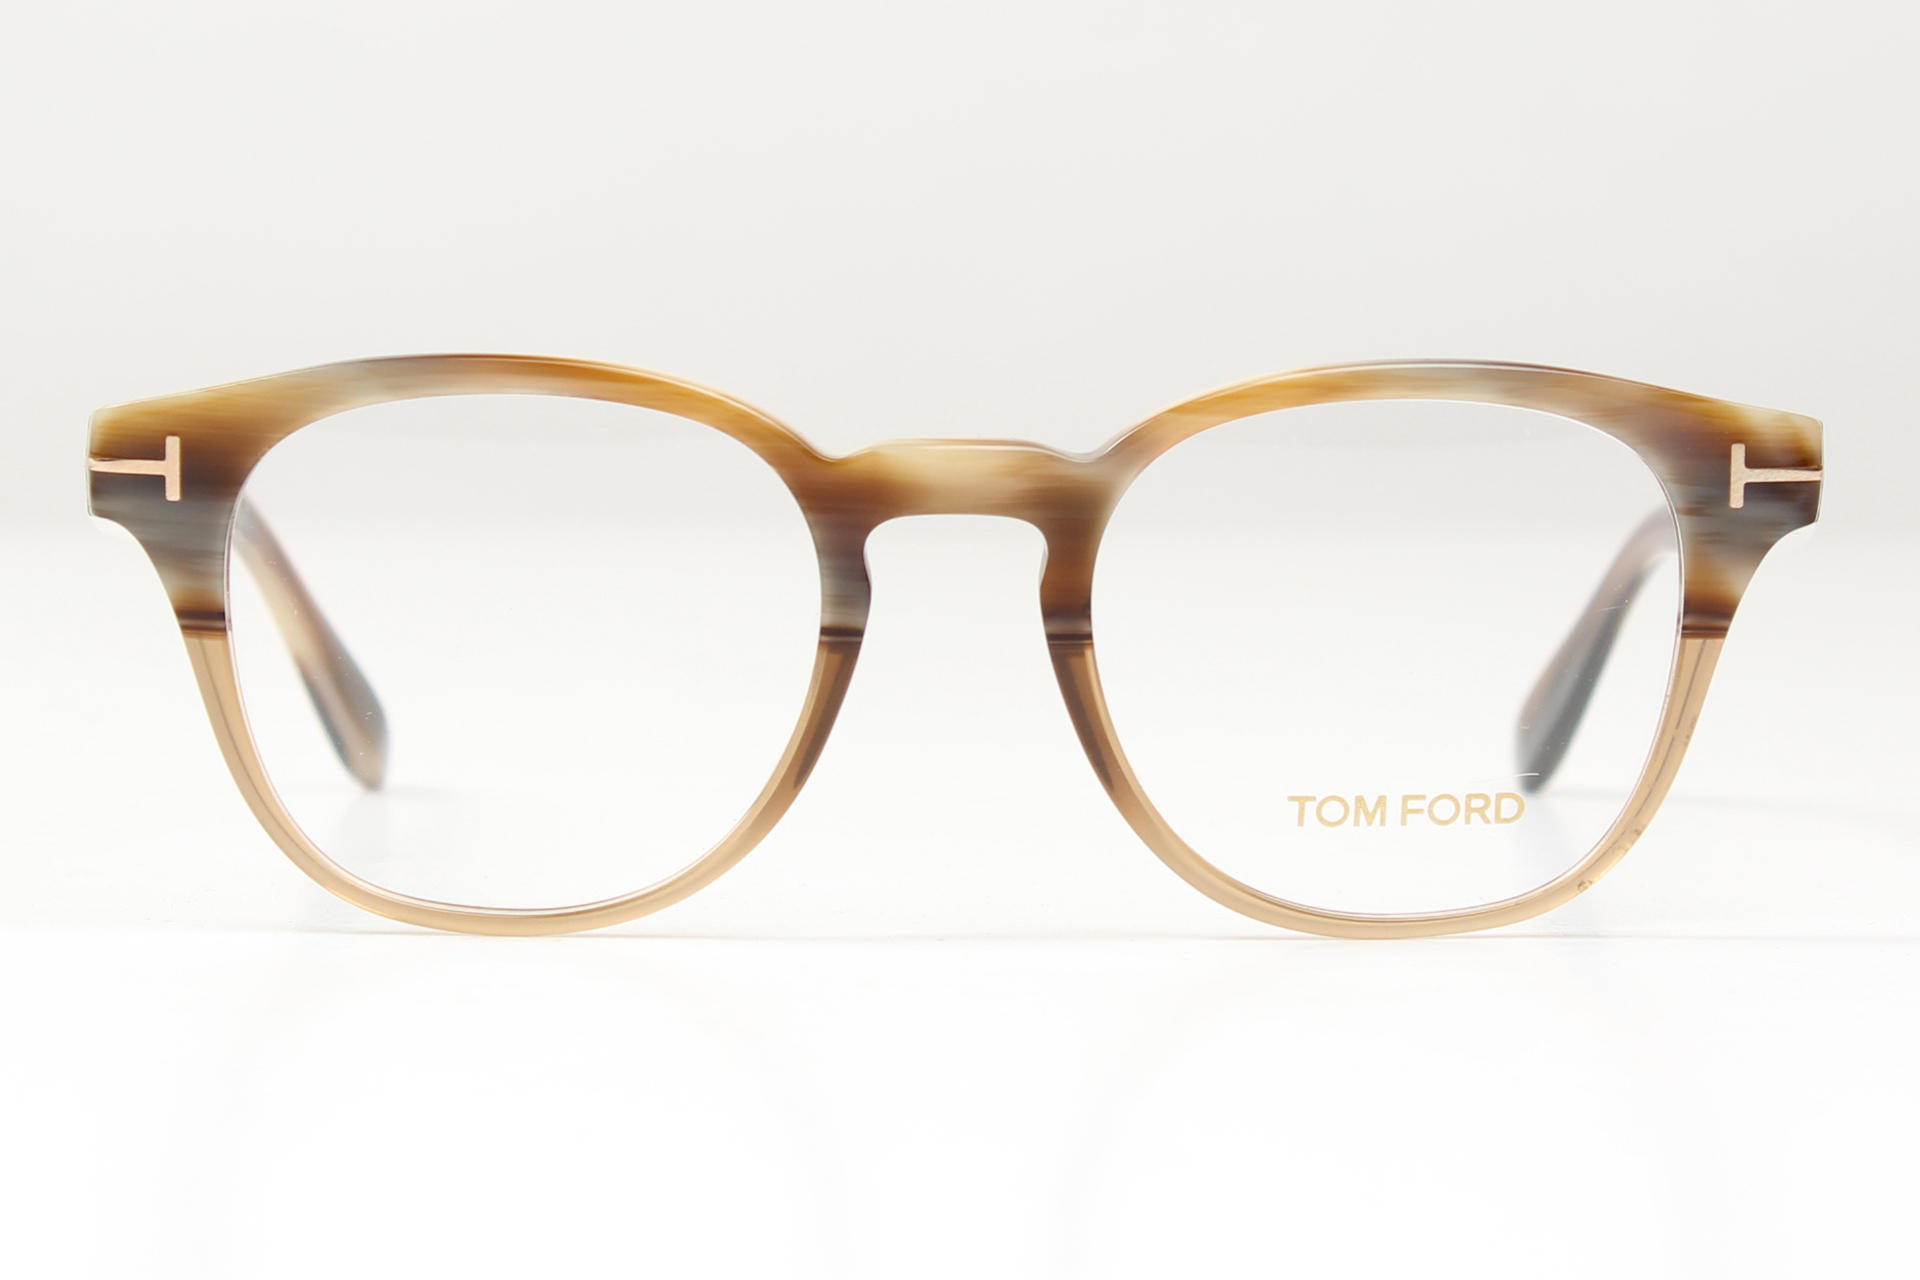 Tom Ford TF5400 65A